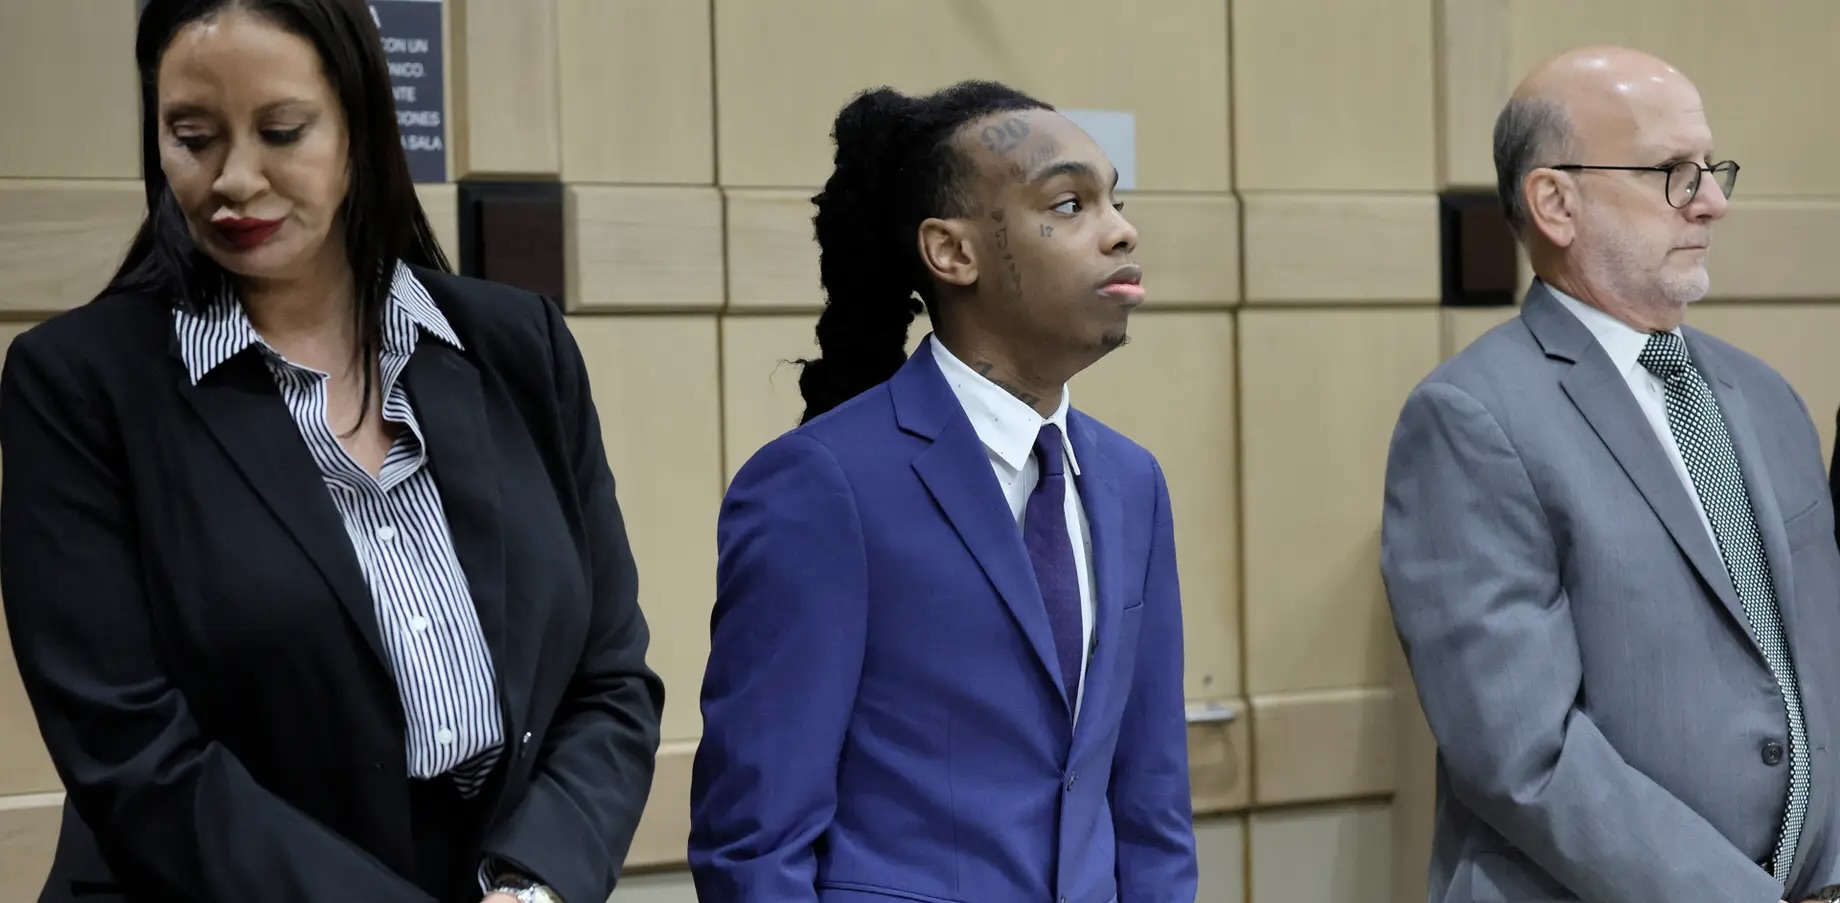 YNW Melly to Face Retrial on Murder Charges, Prosecutors Say